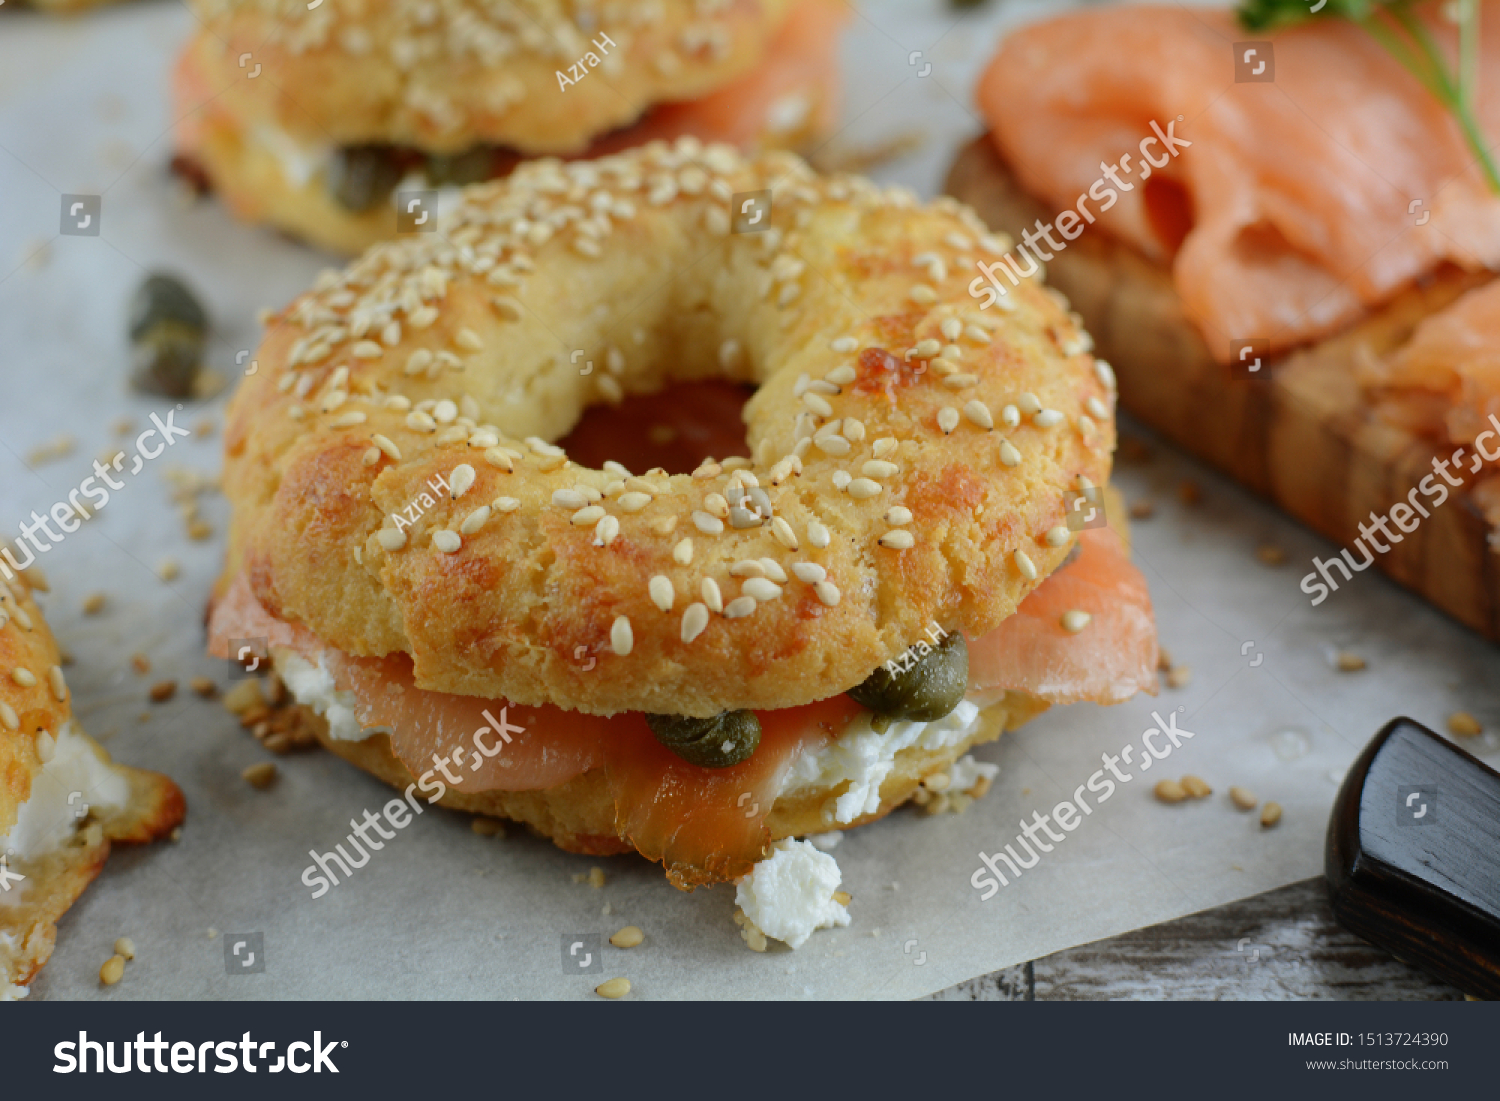 Keto Bagels with Cream Cheese, Smoked Salmon and Capers - an entire recipe preparation method #1513724390